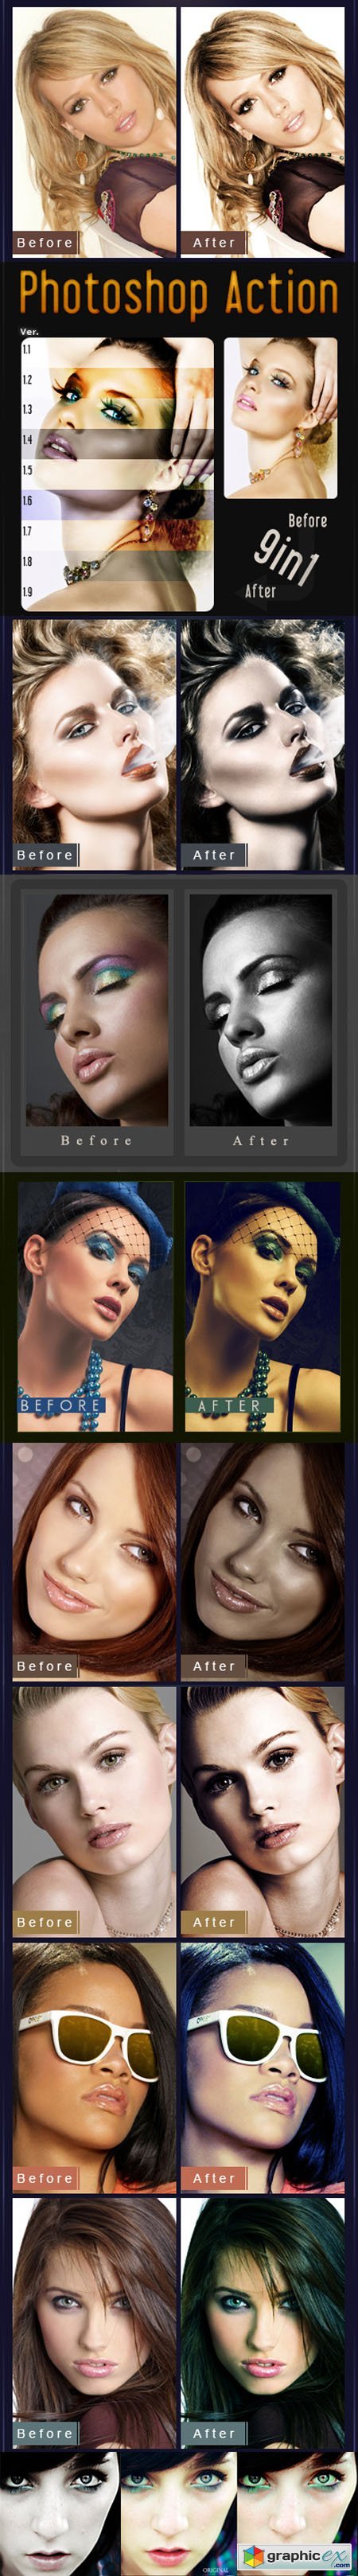 13 Beauty Photoshop Actions